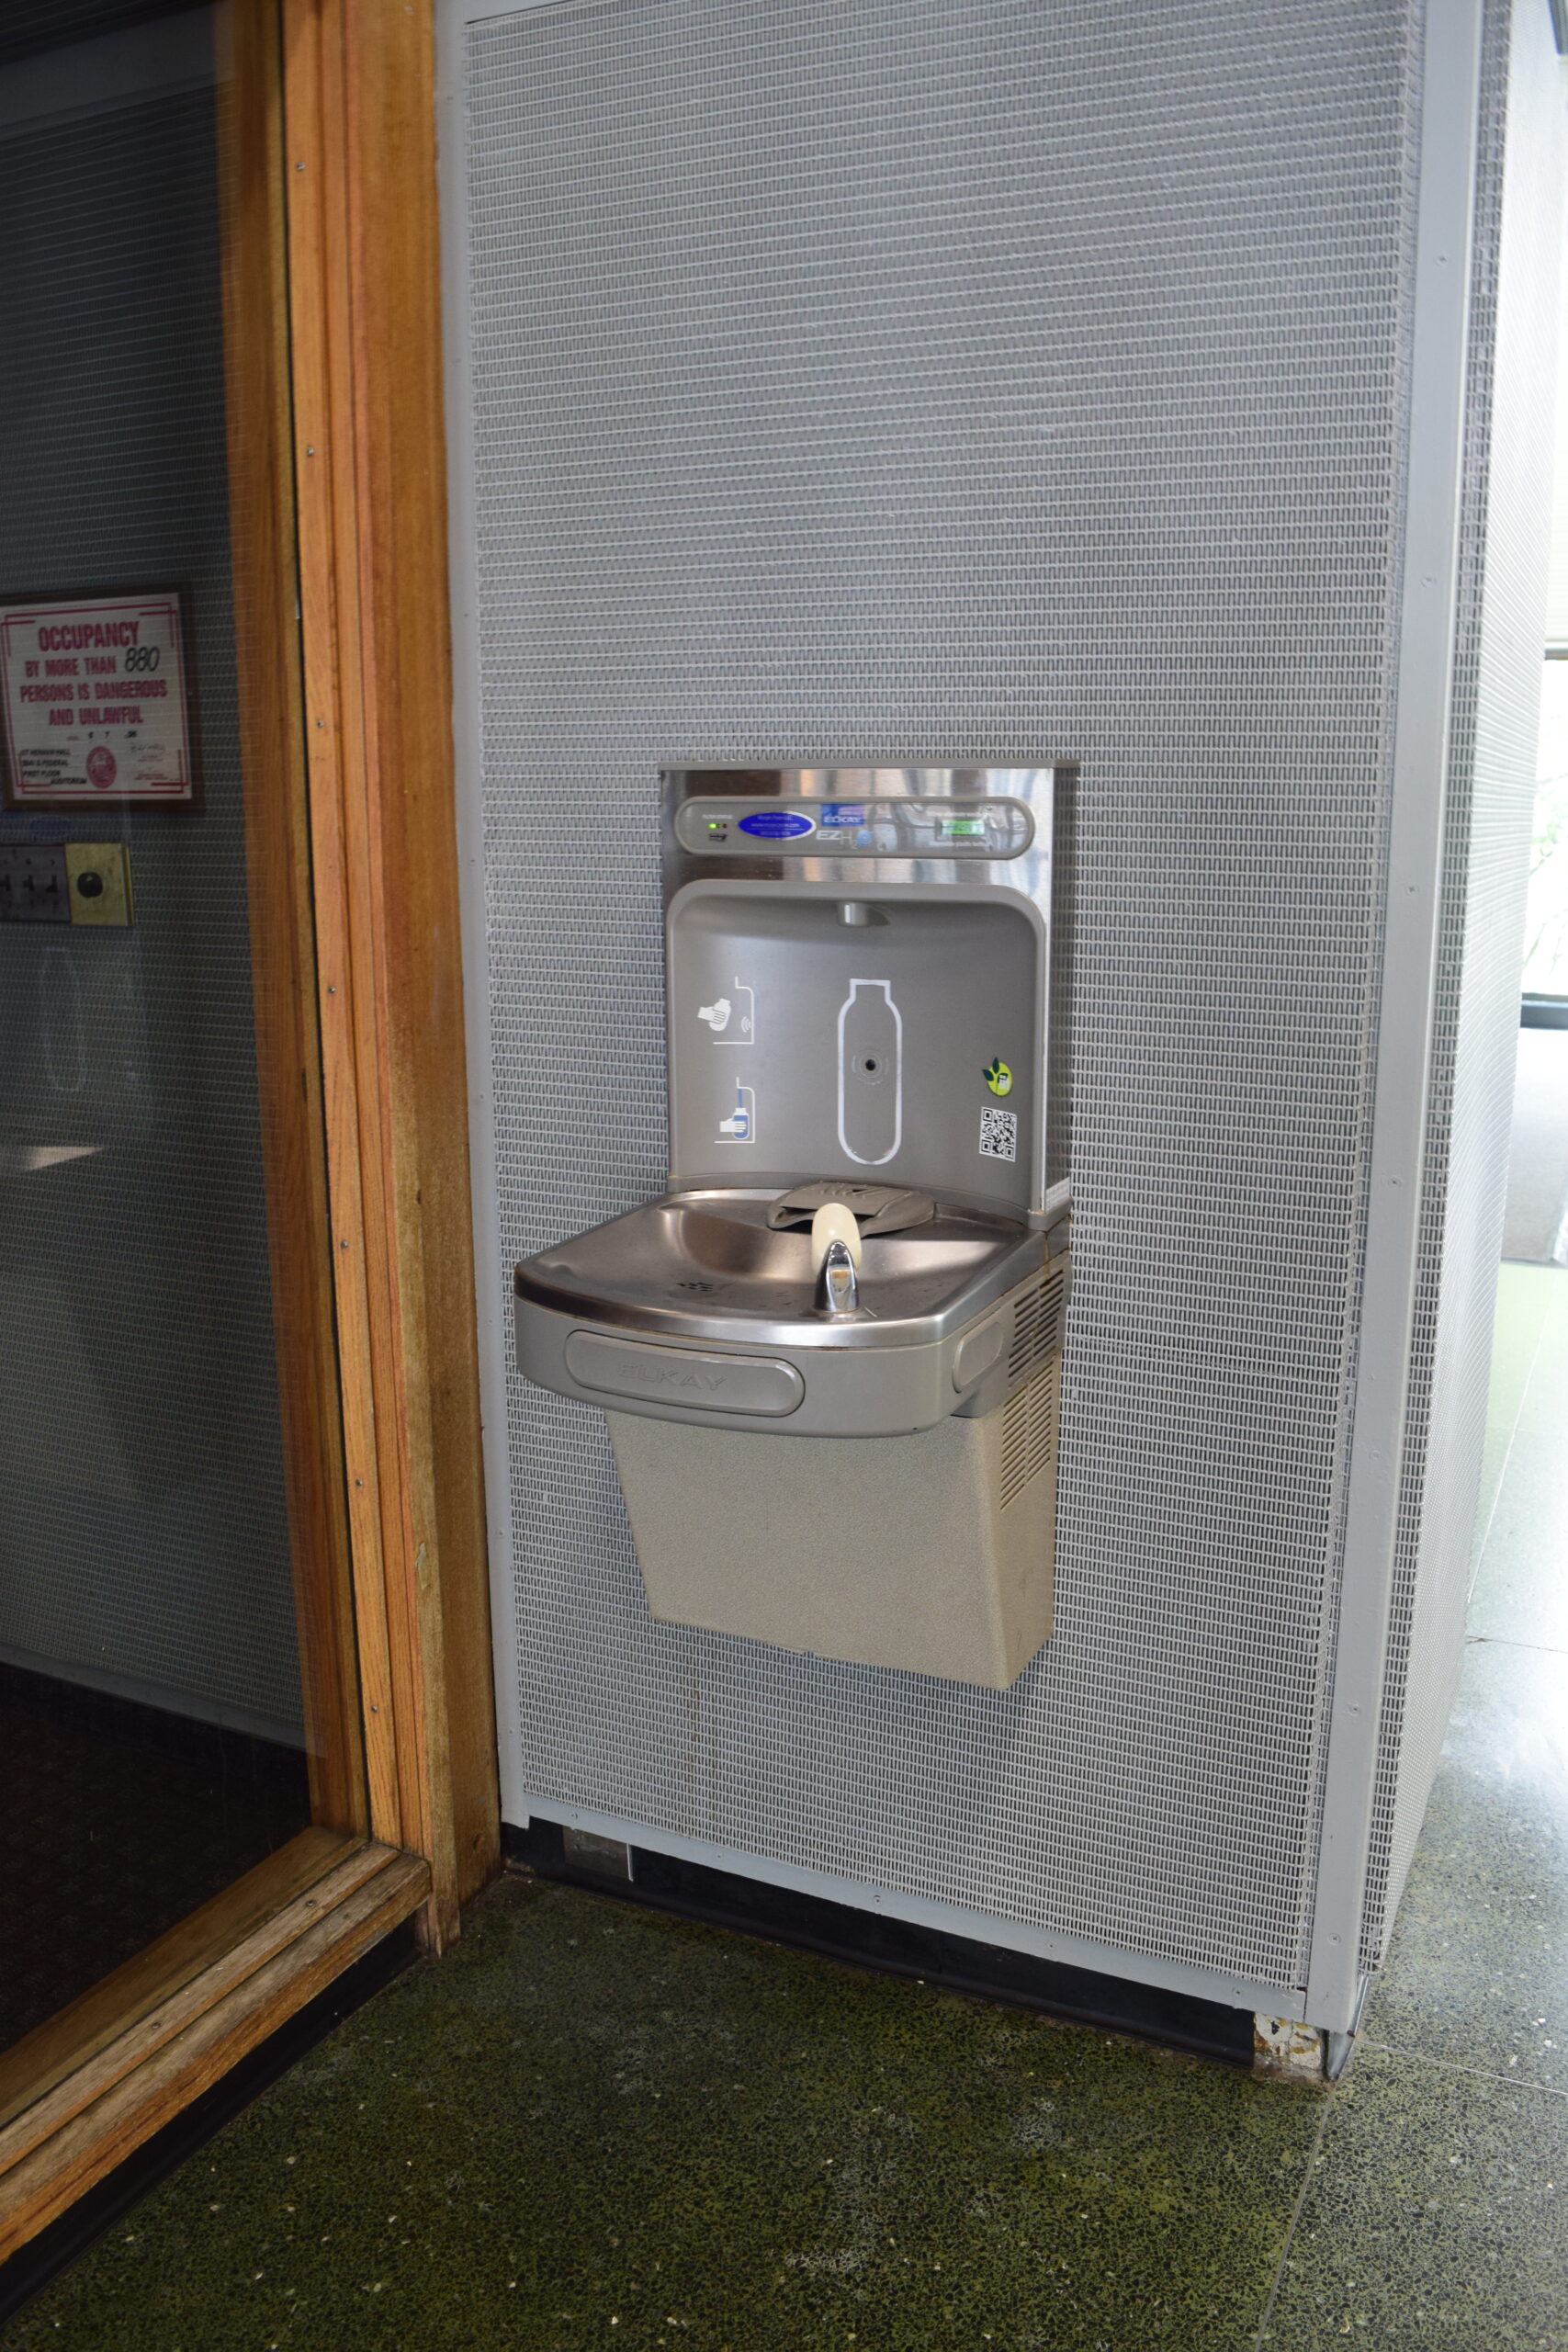 A water fountain, low to the ground with a spout for drinking and a tap at the back to fill water bottles.